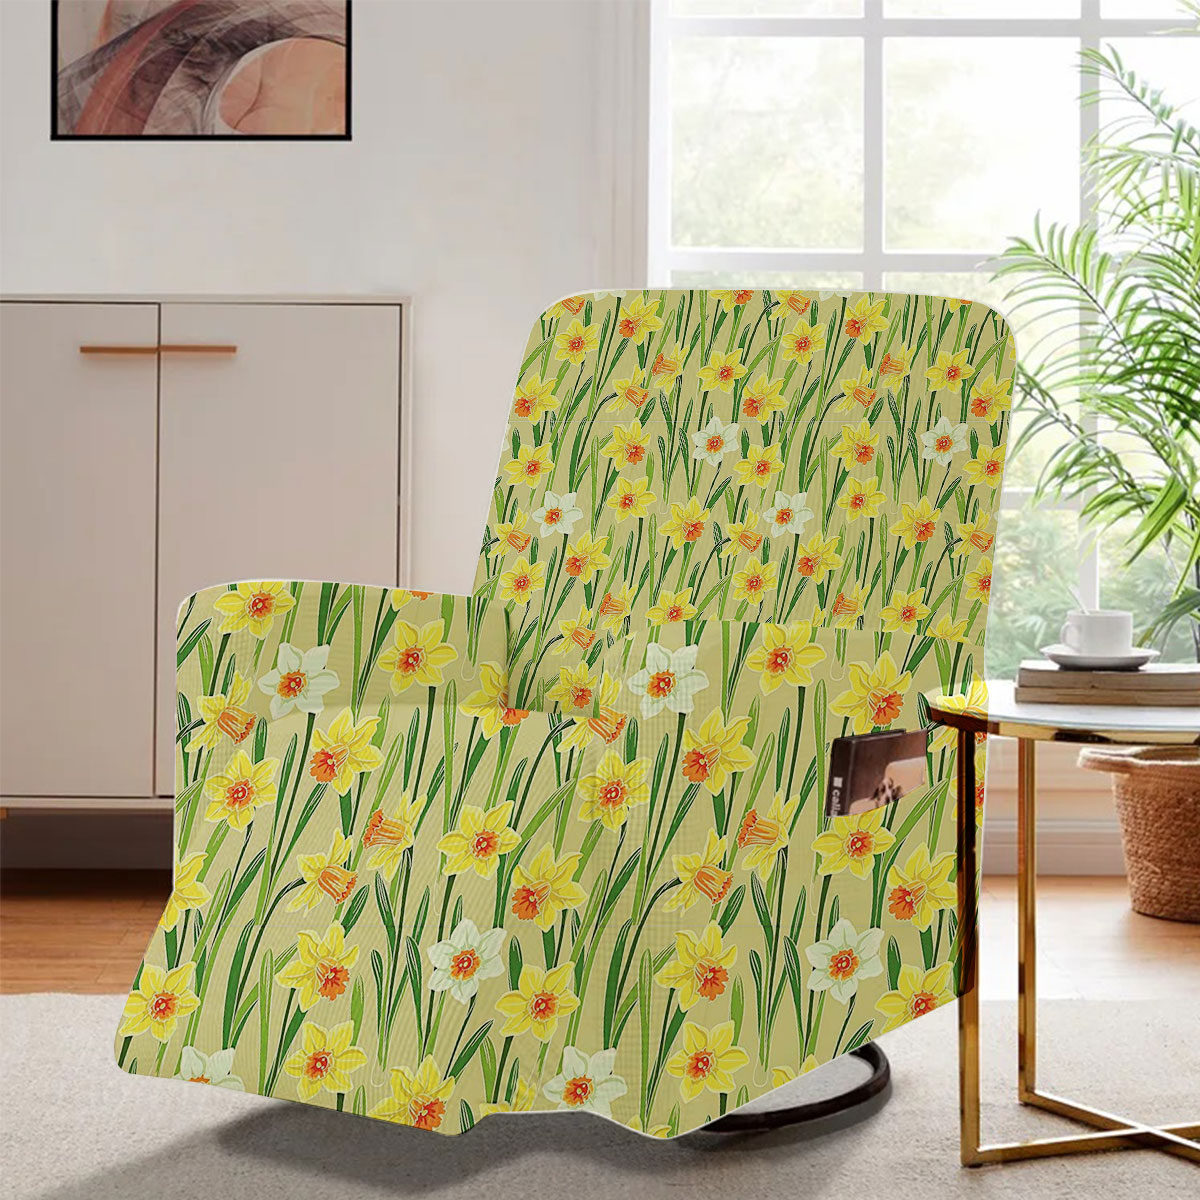 Yellow Jonquil Daffodil Narcissus Recliner Slipcover